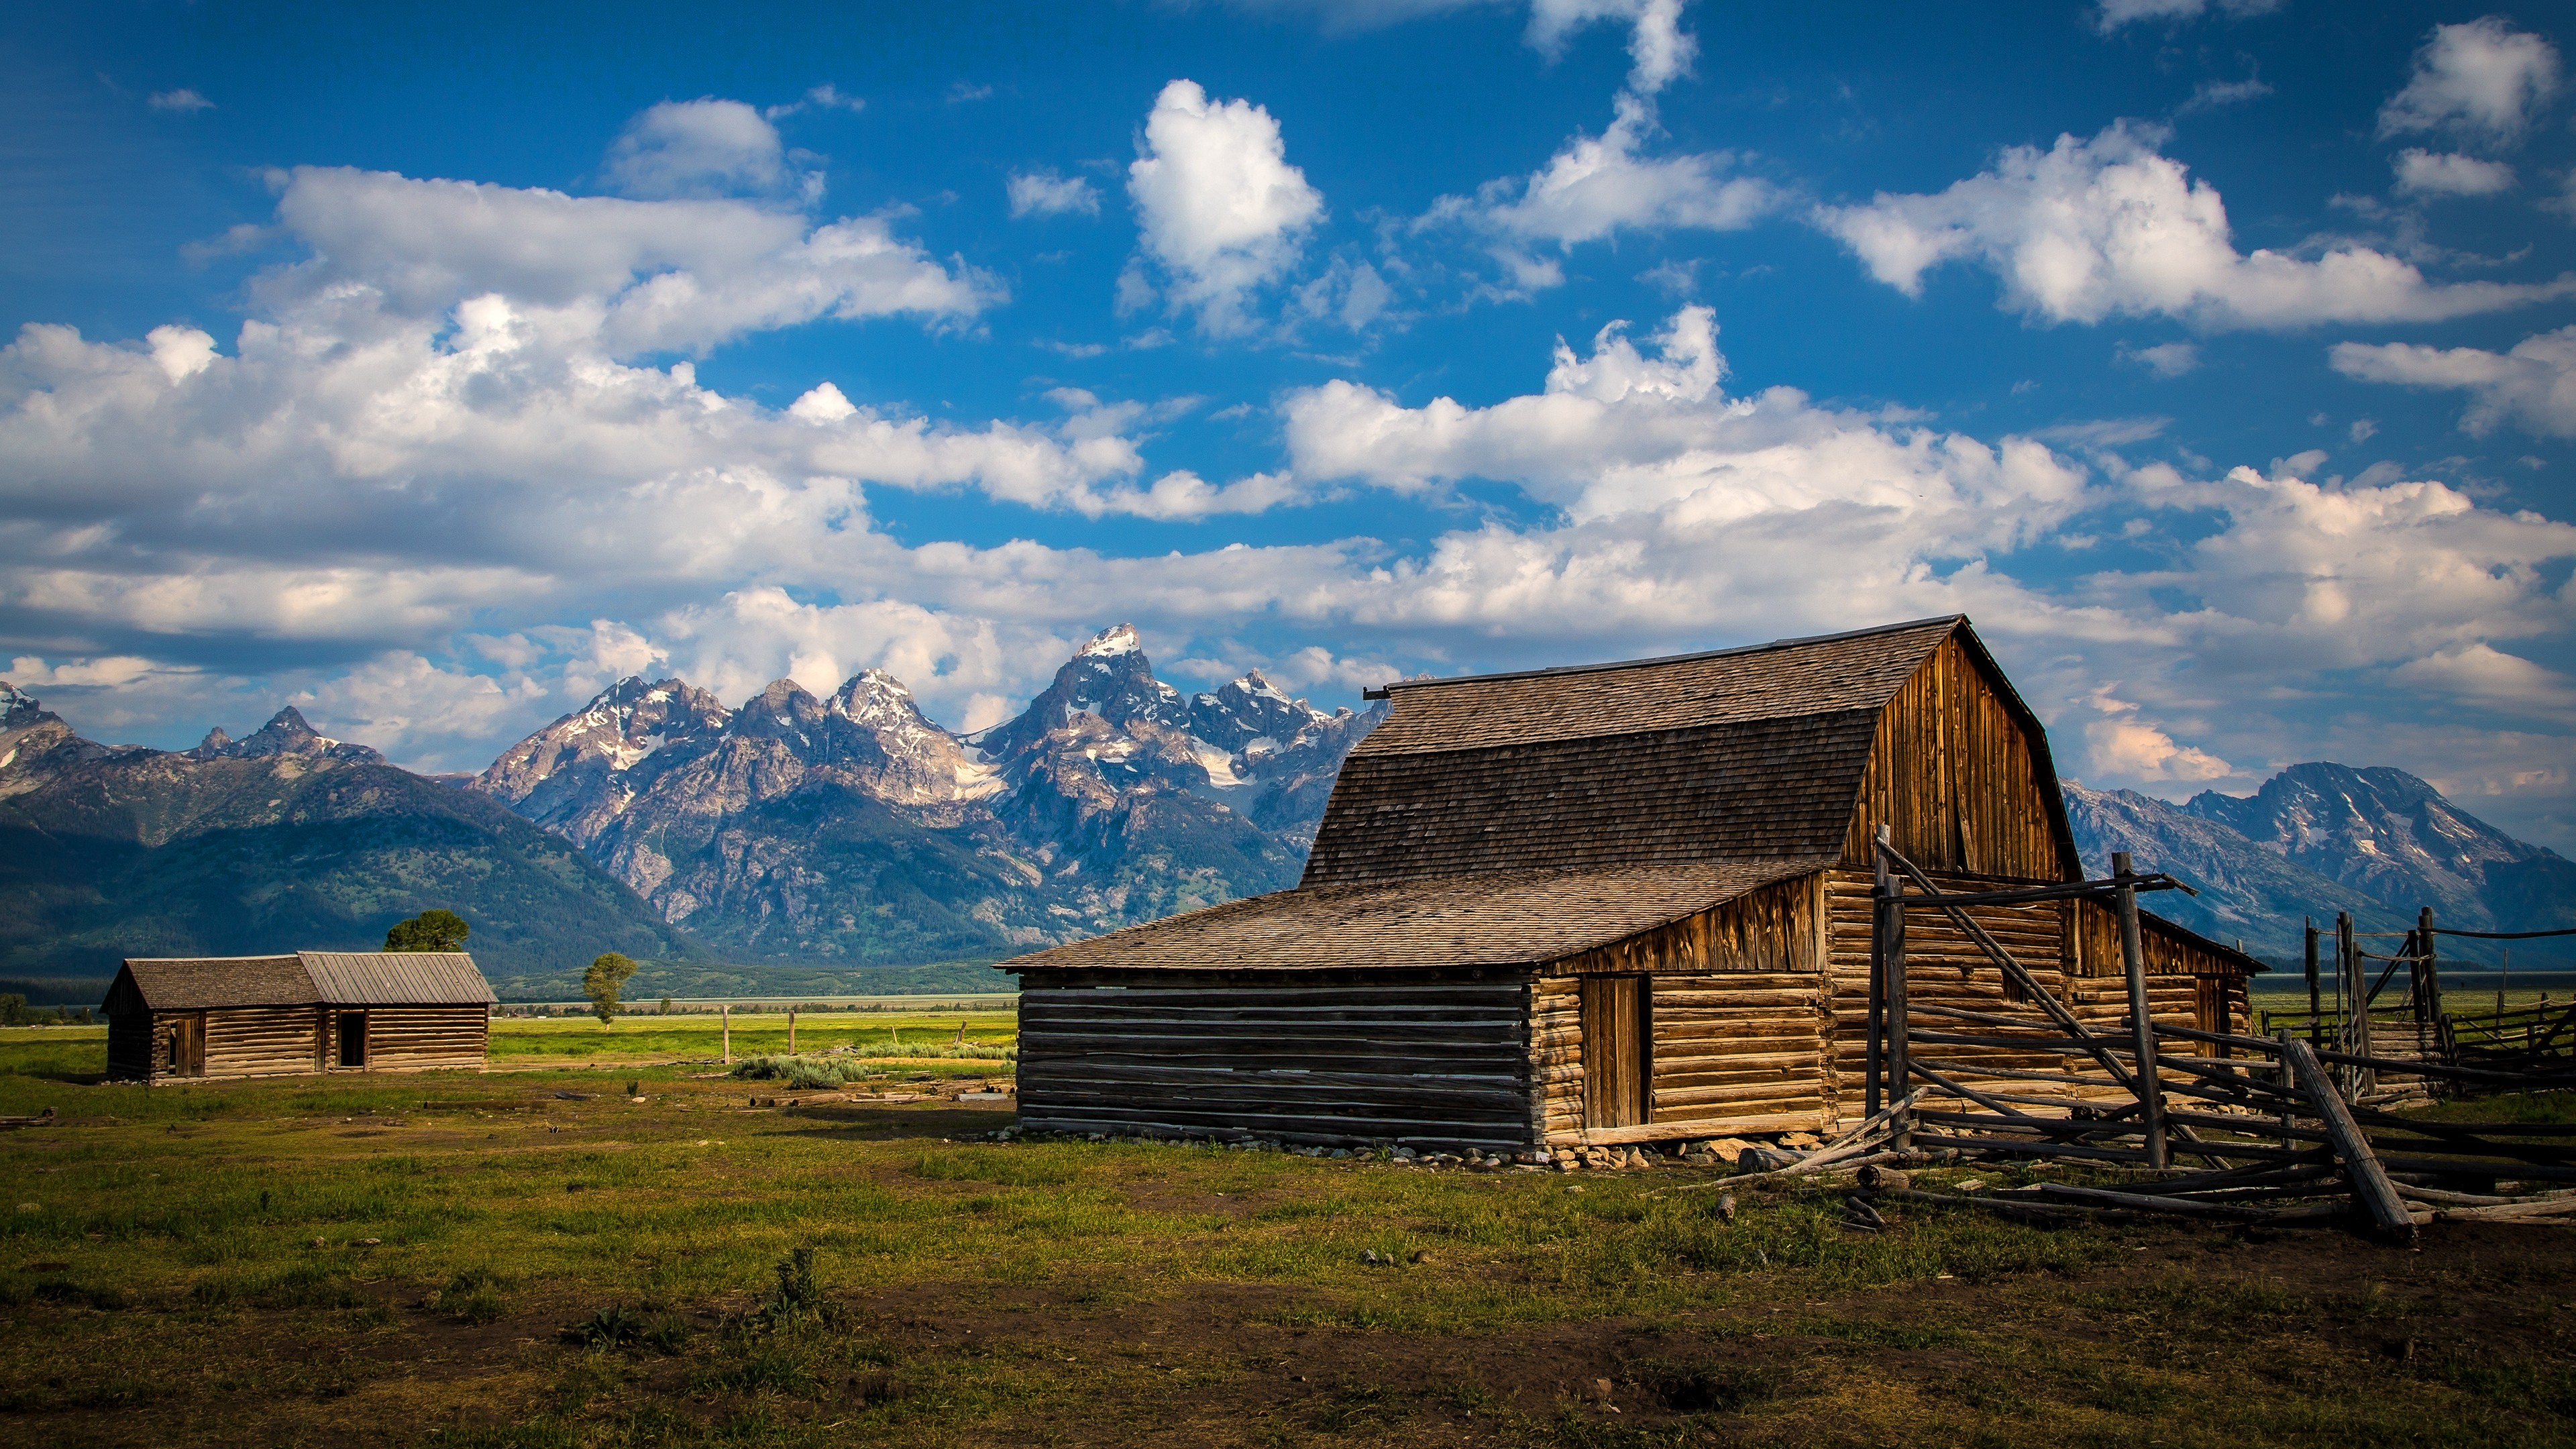 General 3840x2160 landscape barns mountains nature cabin clouds grass Wyoming USA building Grand Teton National Park